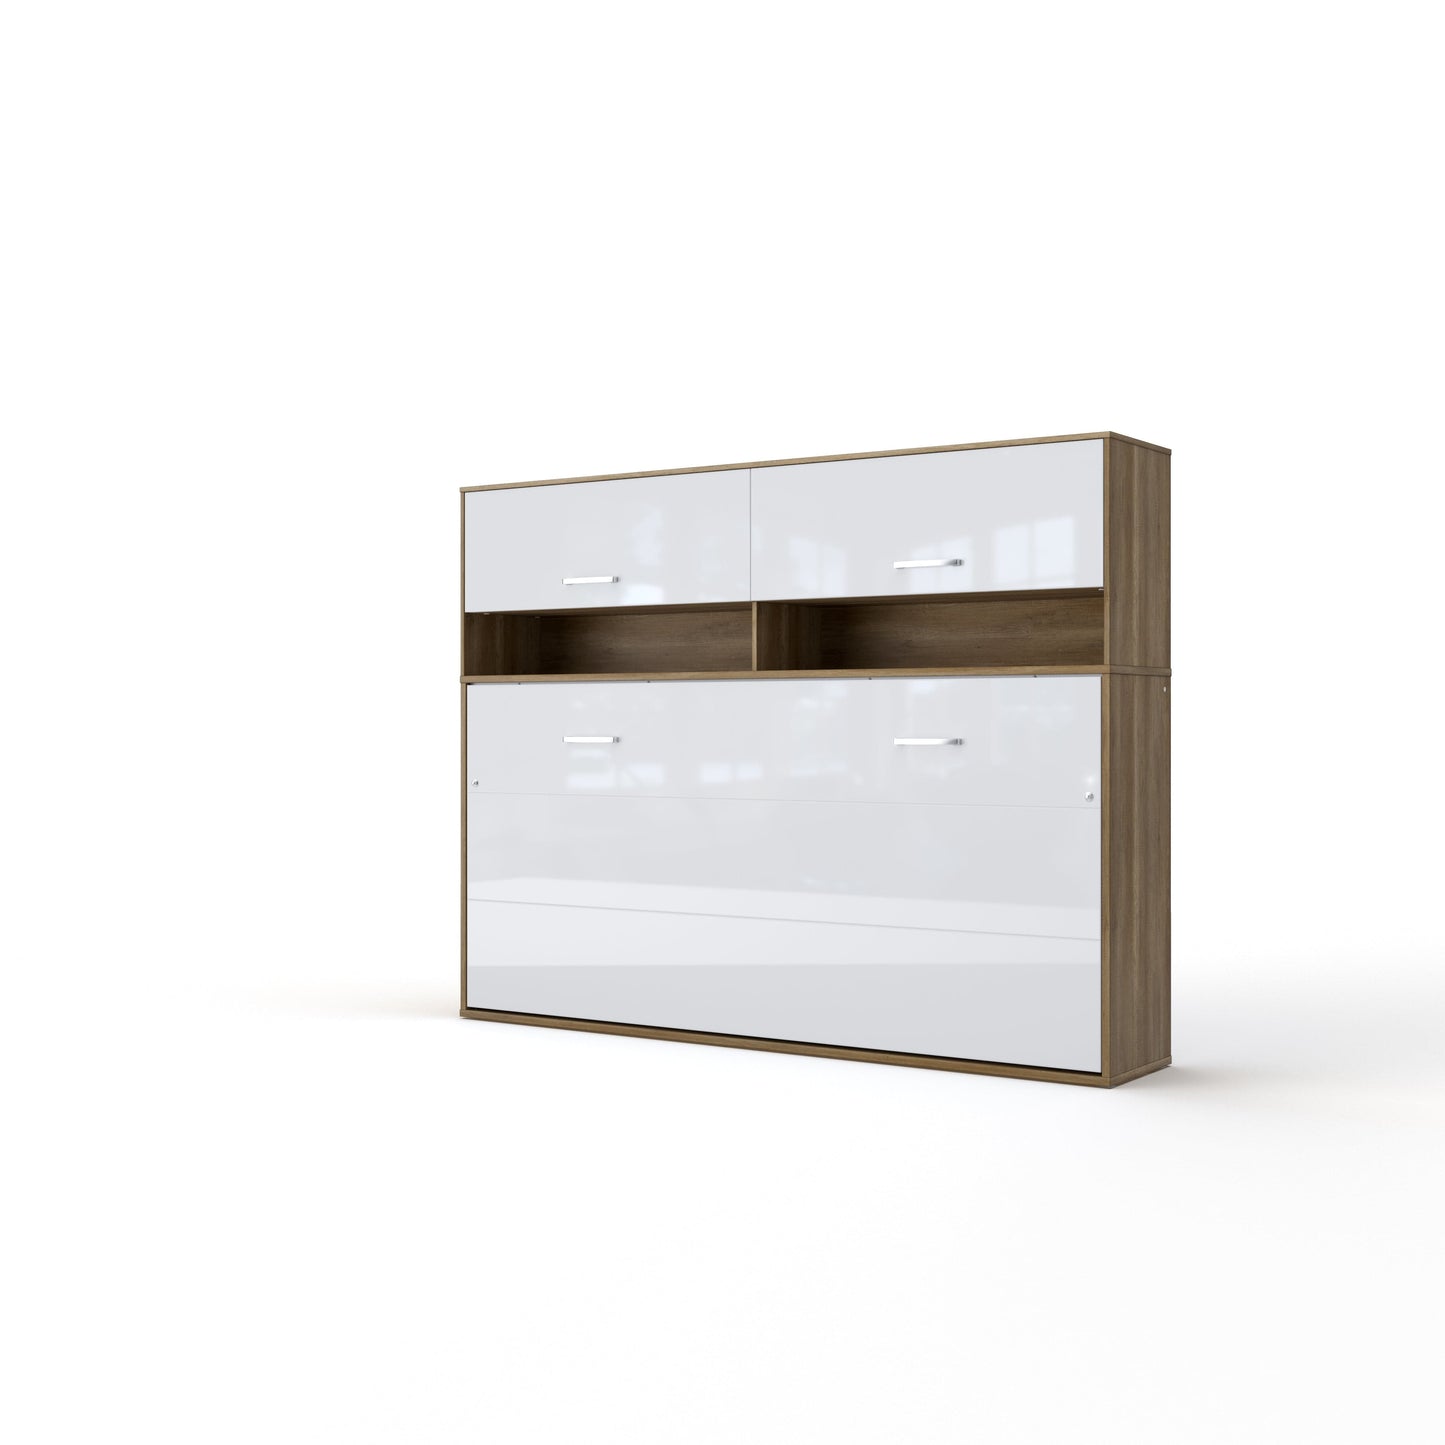 Maxima House Maxima House Invento Horizontal Wall Bed, European Twin Size with a cabinet on top Oak Country/White IN90H-11OW